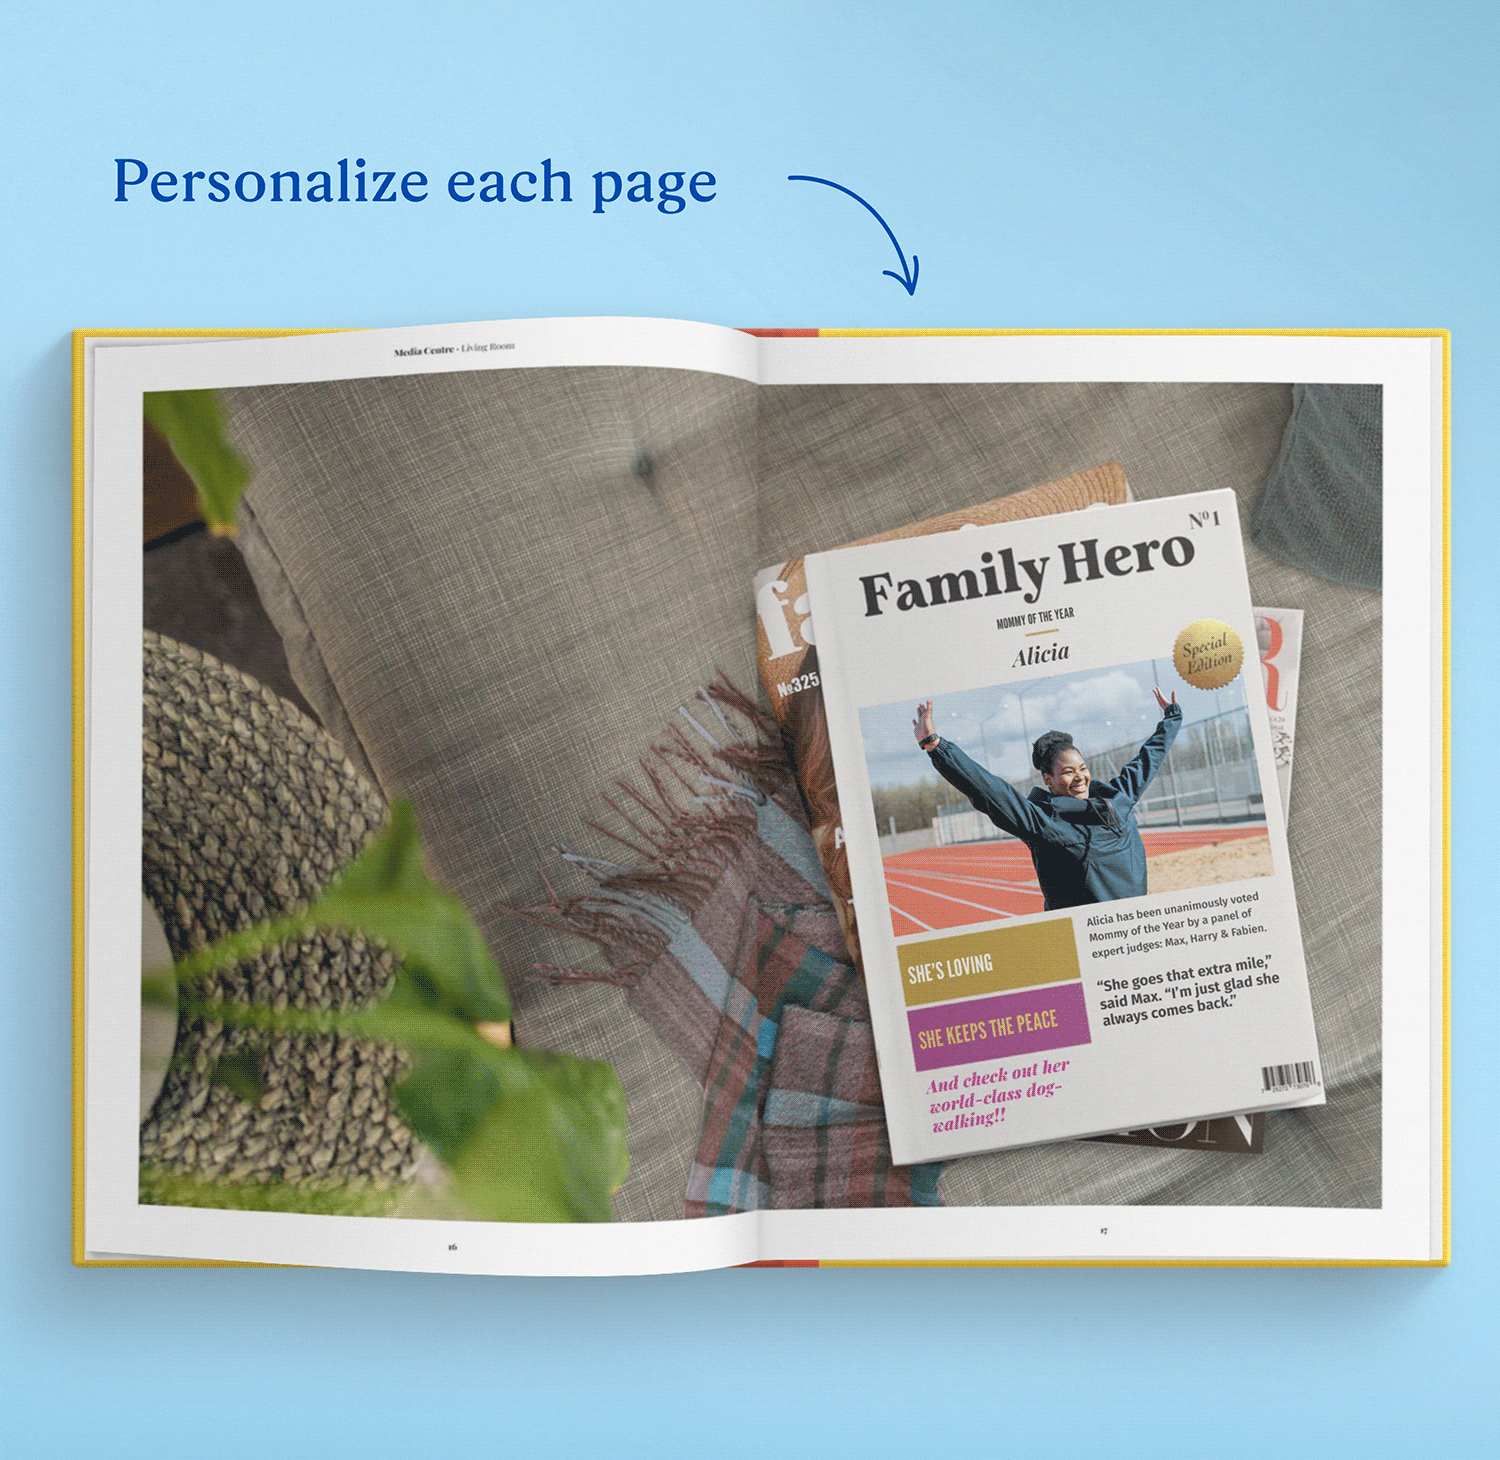 GIF showing the personalised pages of the book